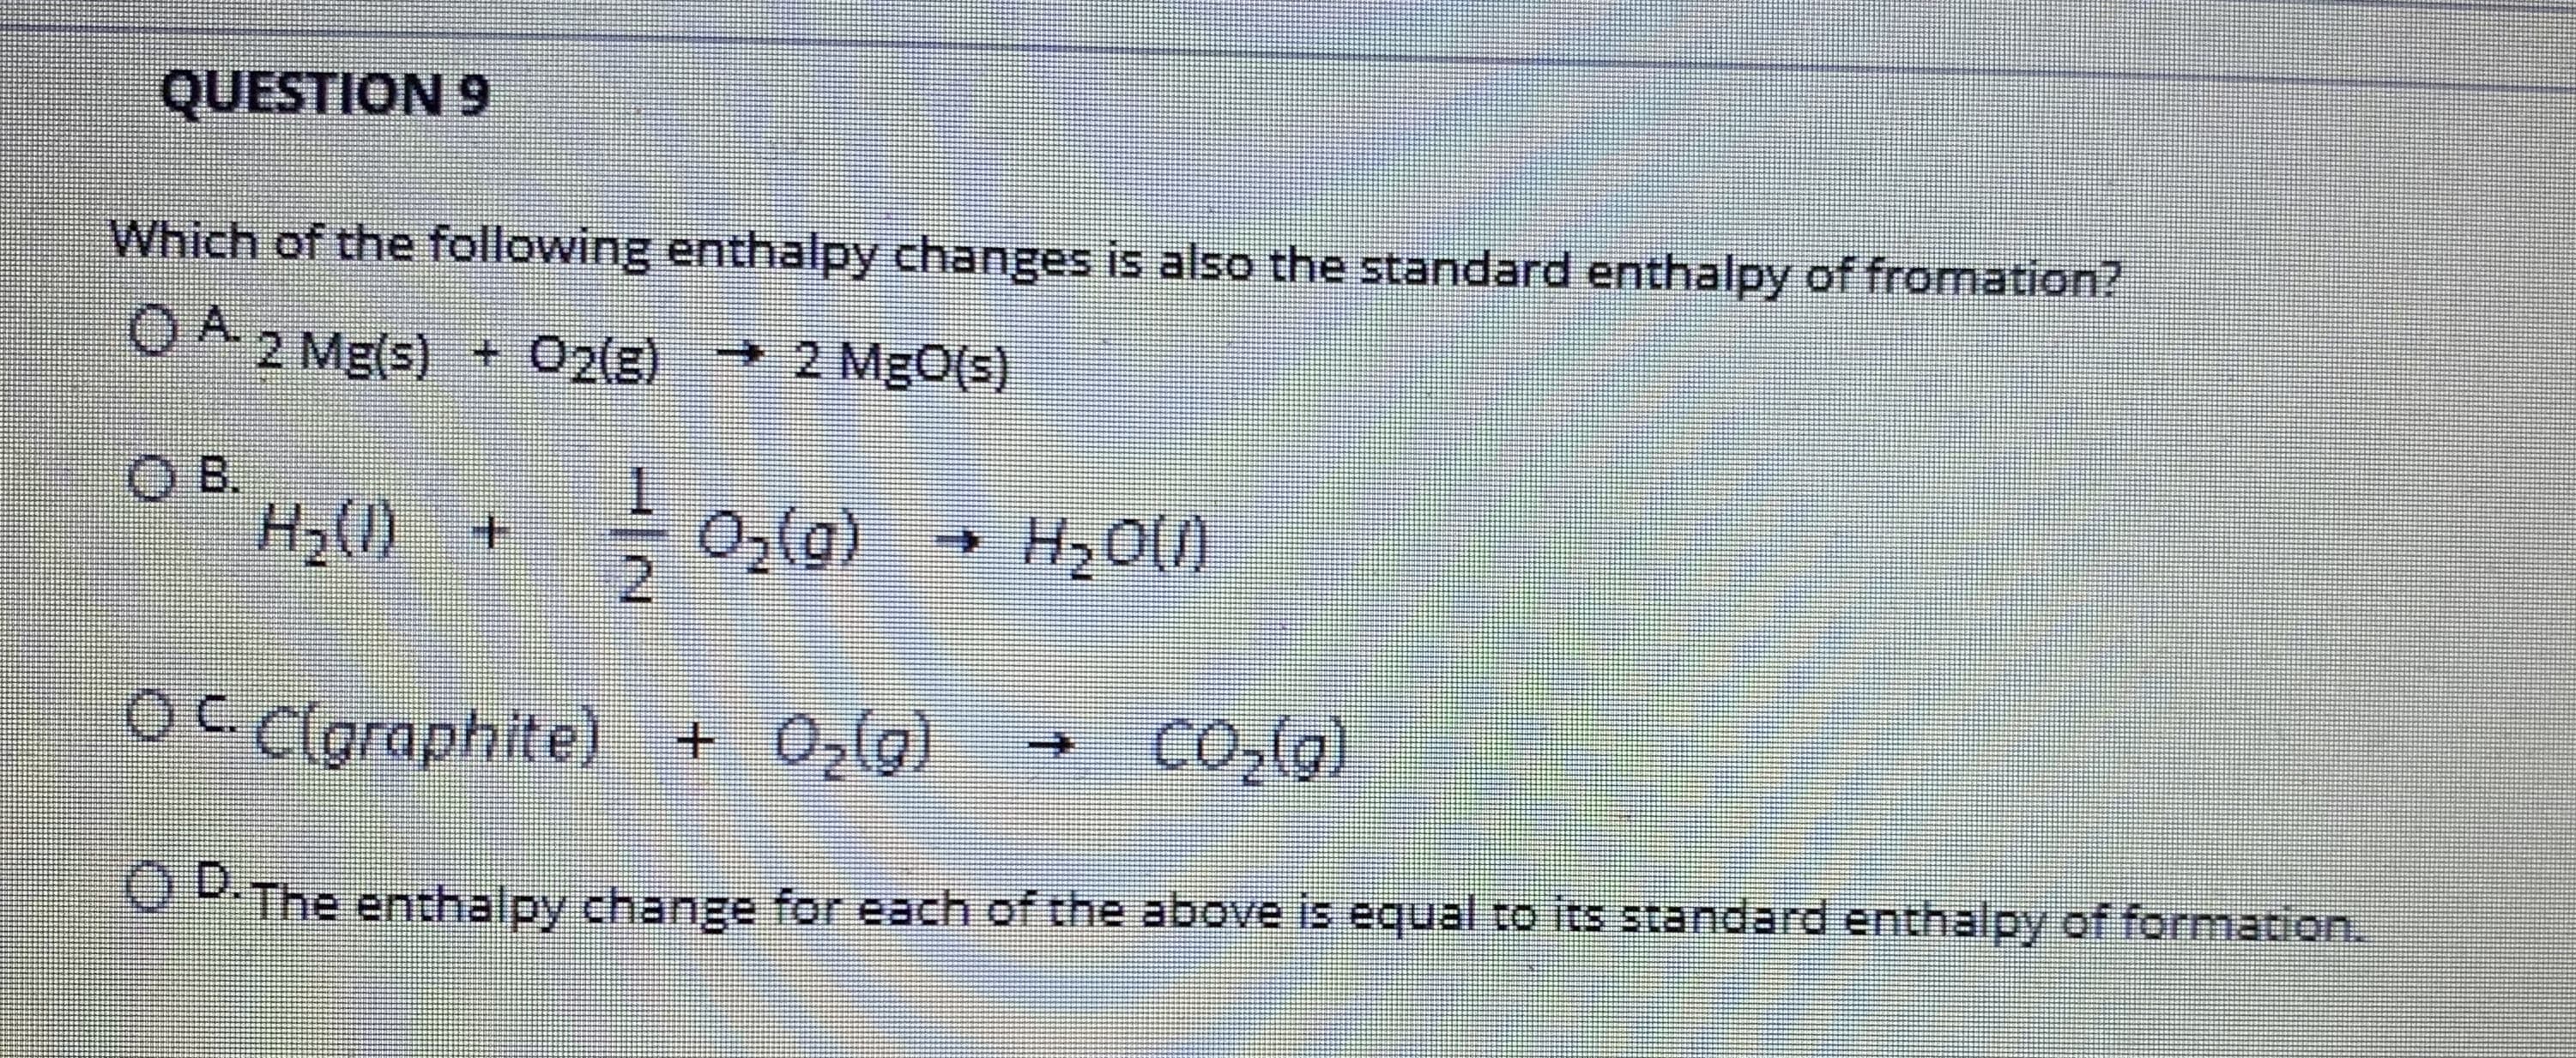 Which of the following enthalpy changes is also the standard enthalpy of fromation?
O42 Mg(s) + 02(E)
2 MgO(s)
